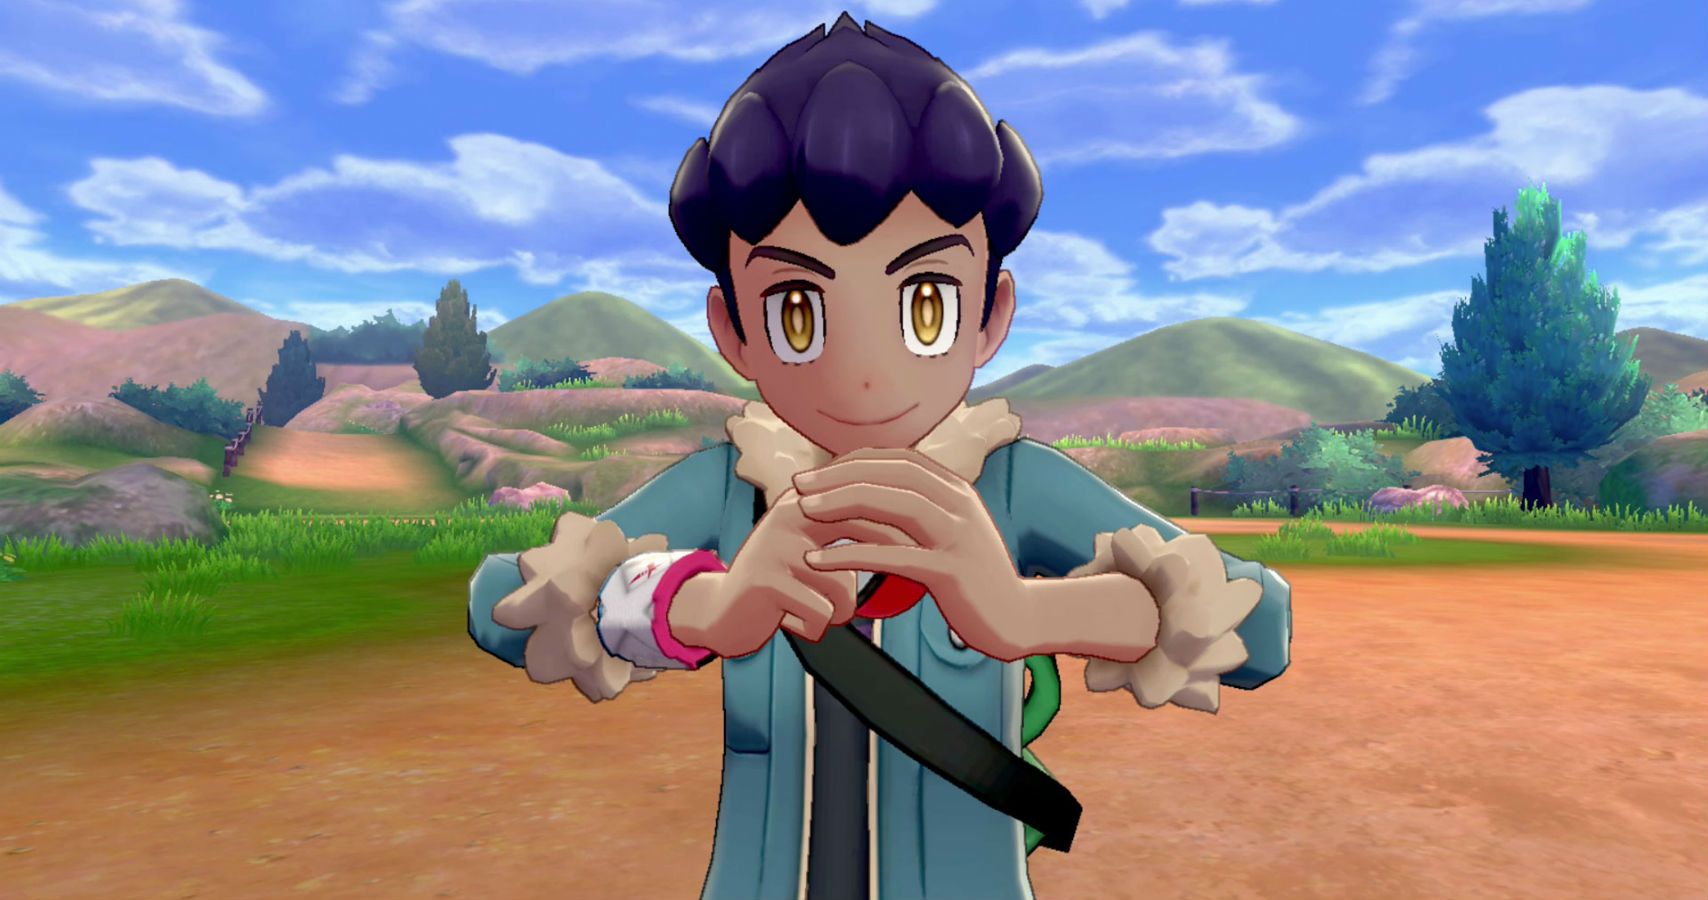 Pokémon Sword & Shield No National Dex Is Better For The Series